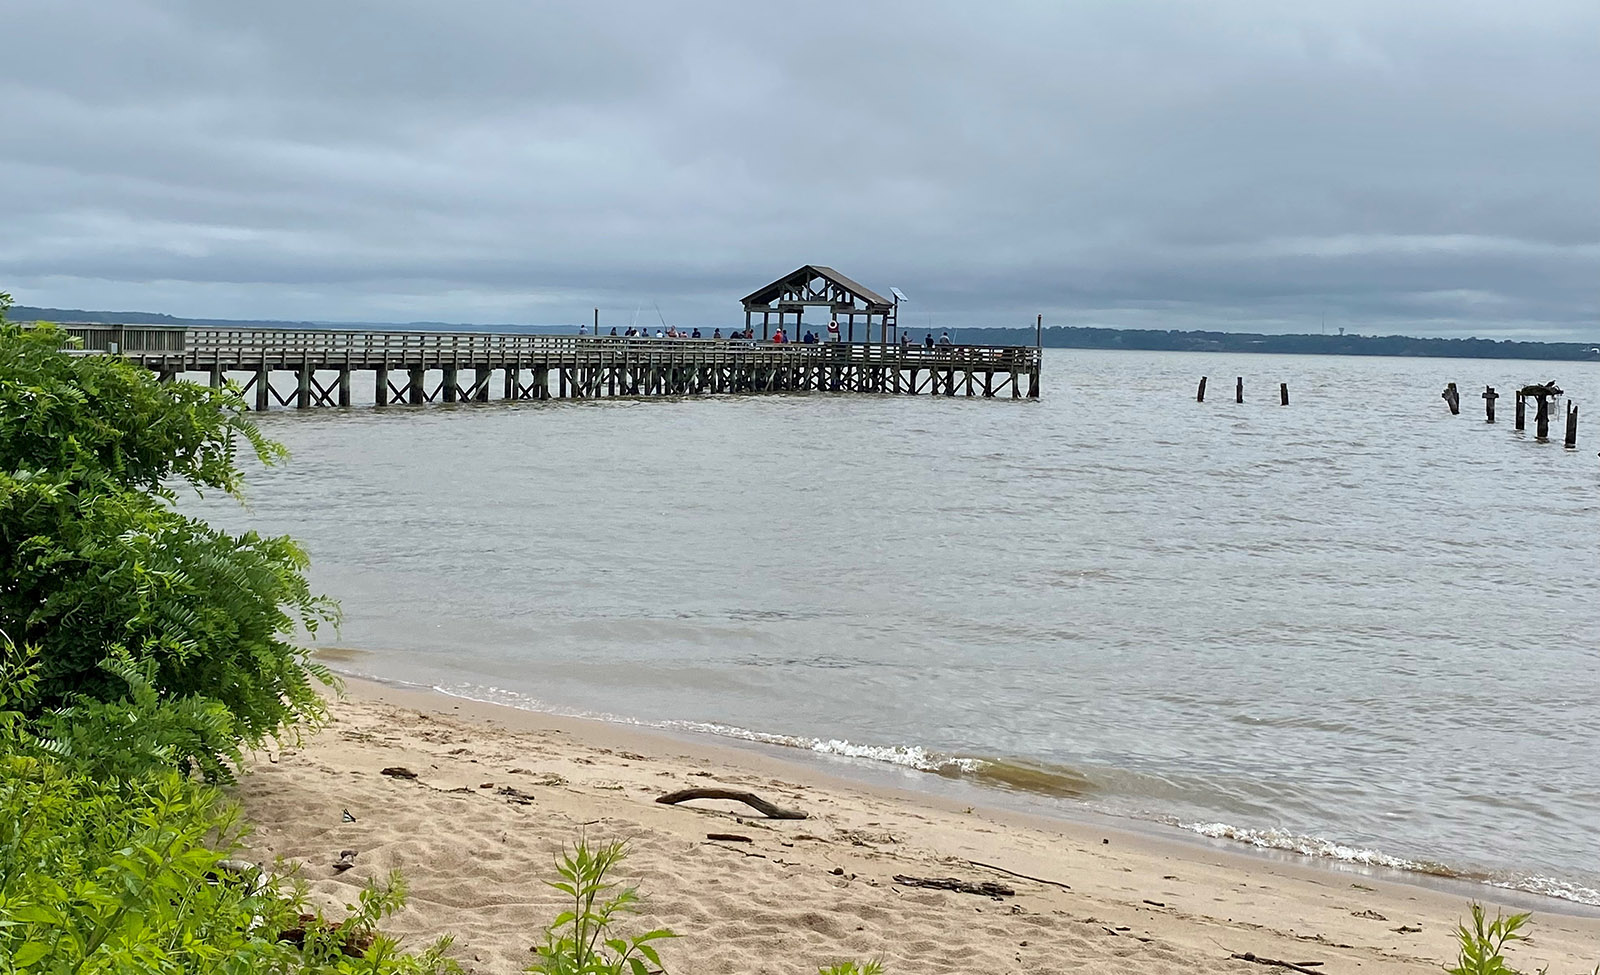 An image of a fishing pier in Leesylvania state park